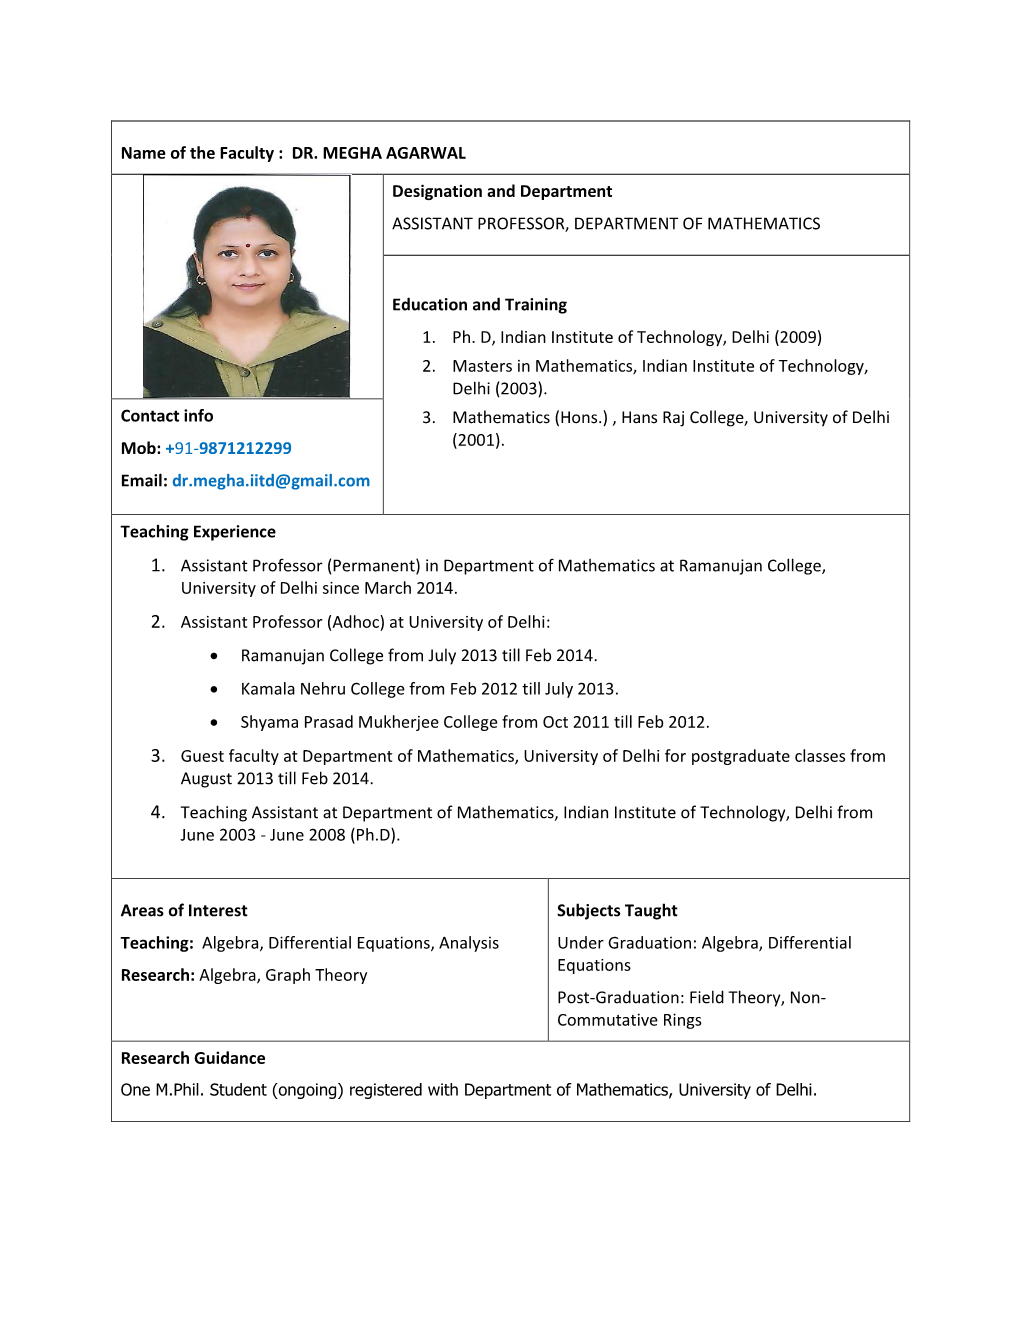 Name of the Faculty : DR. MEGHA AGARWAL